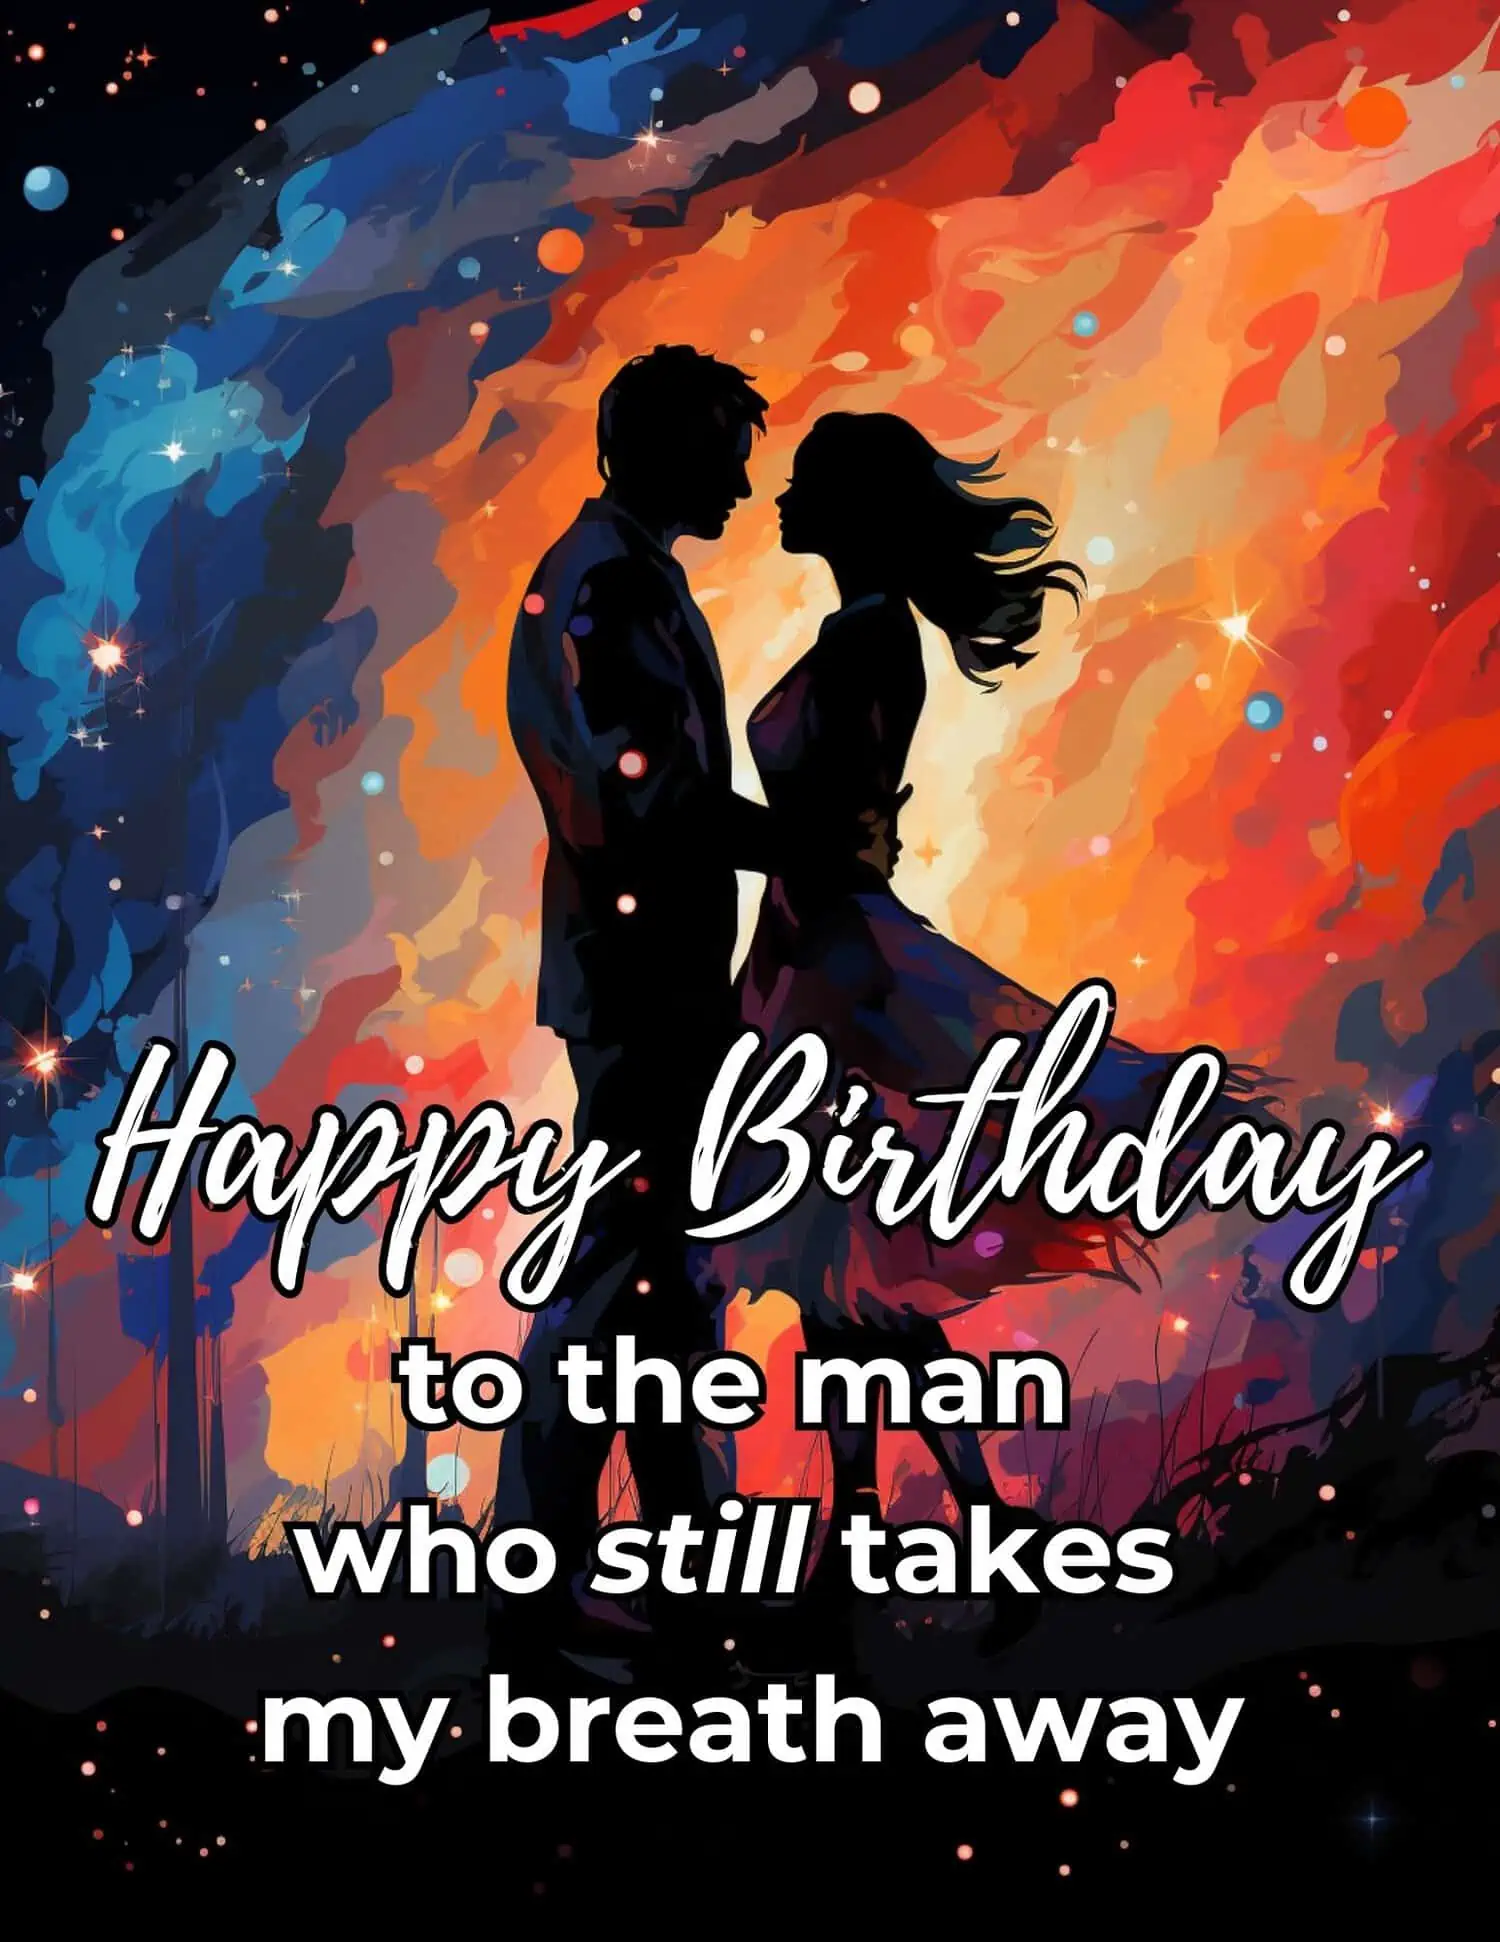 A selection of deeply emotional and touching birthday wishes for your husband.